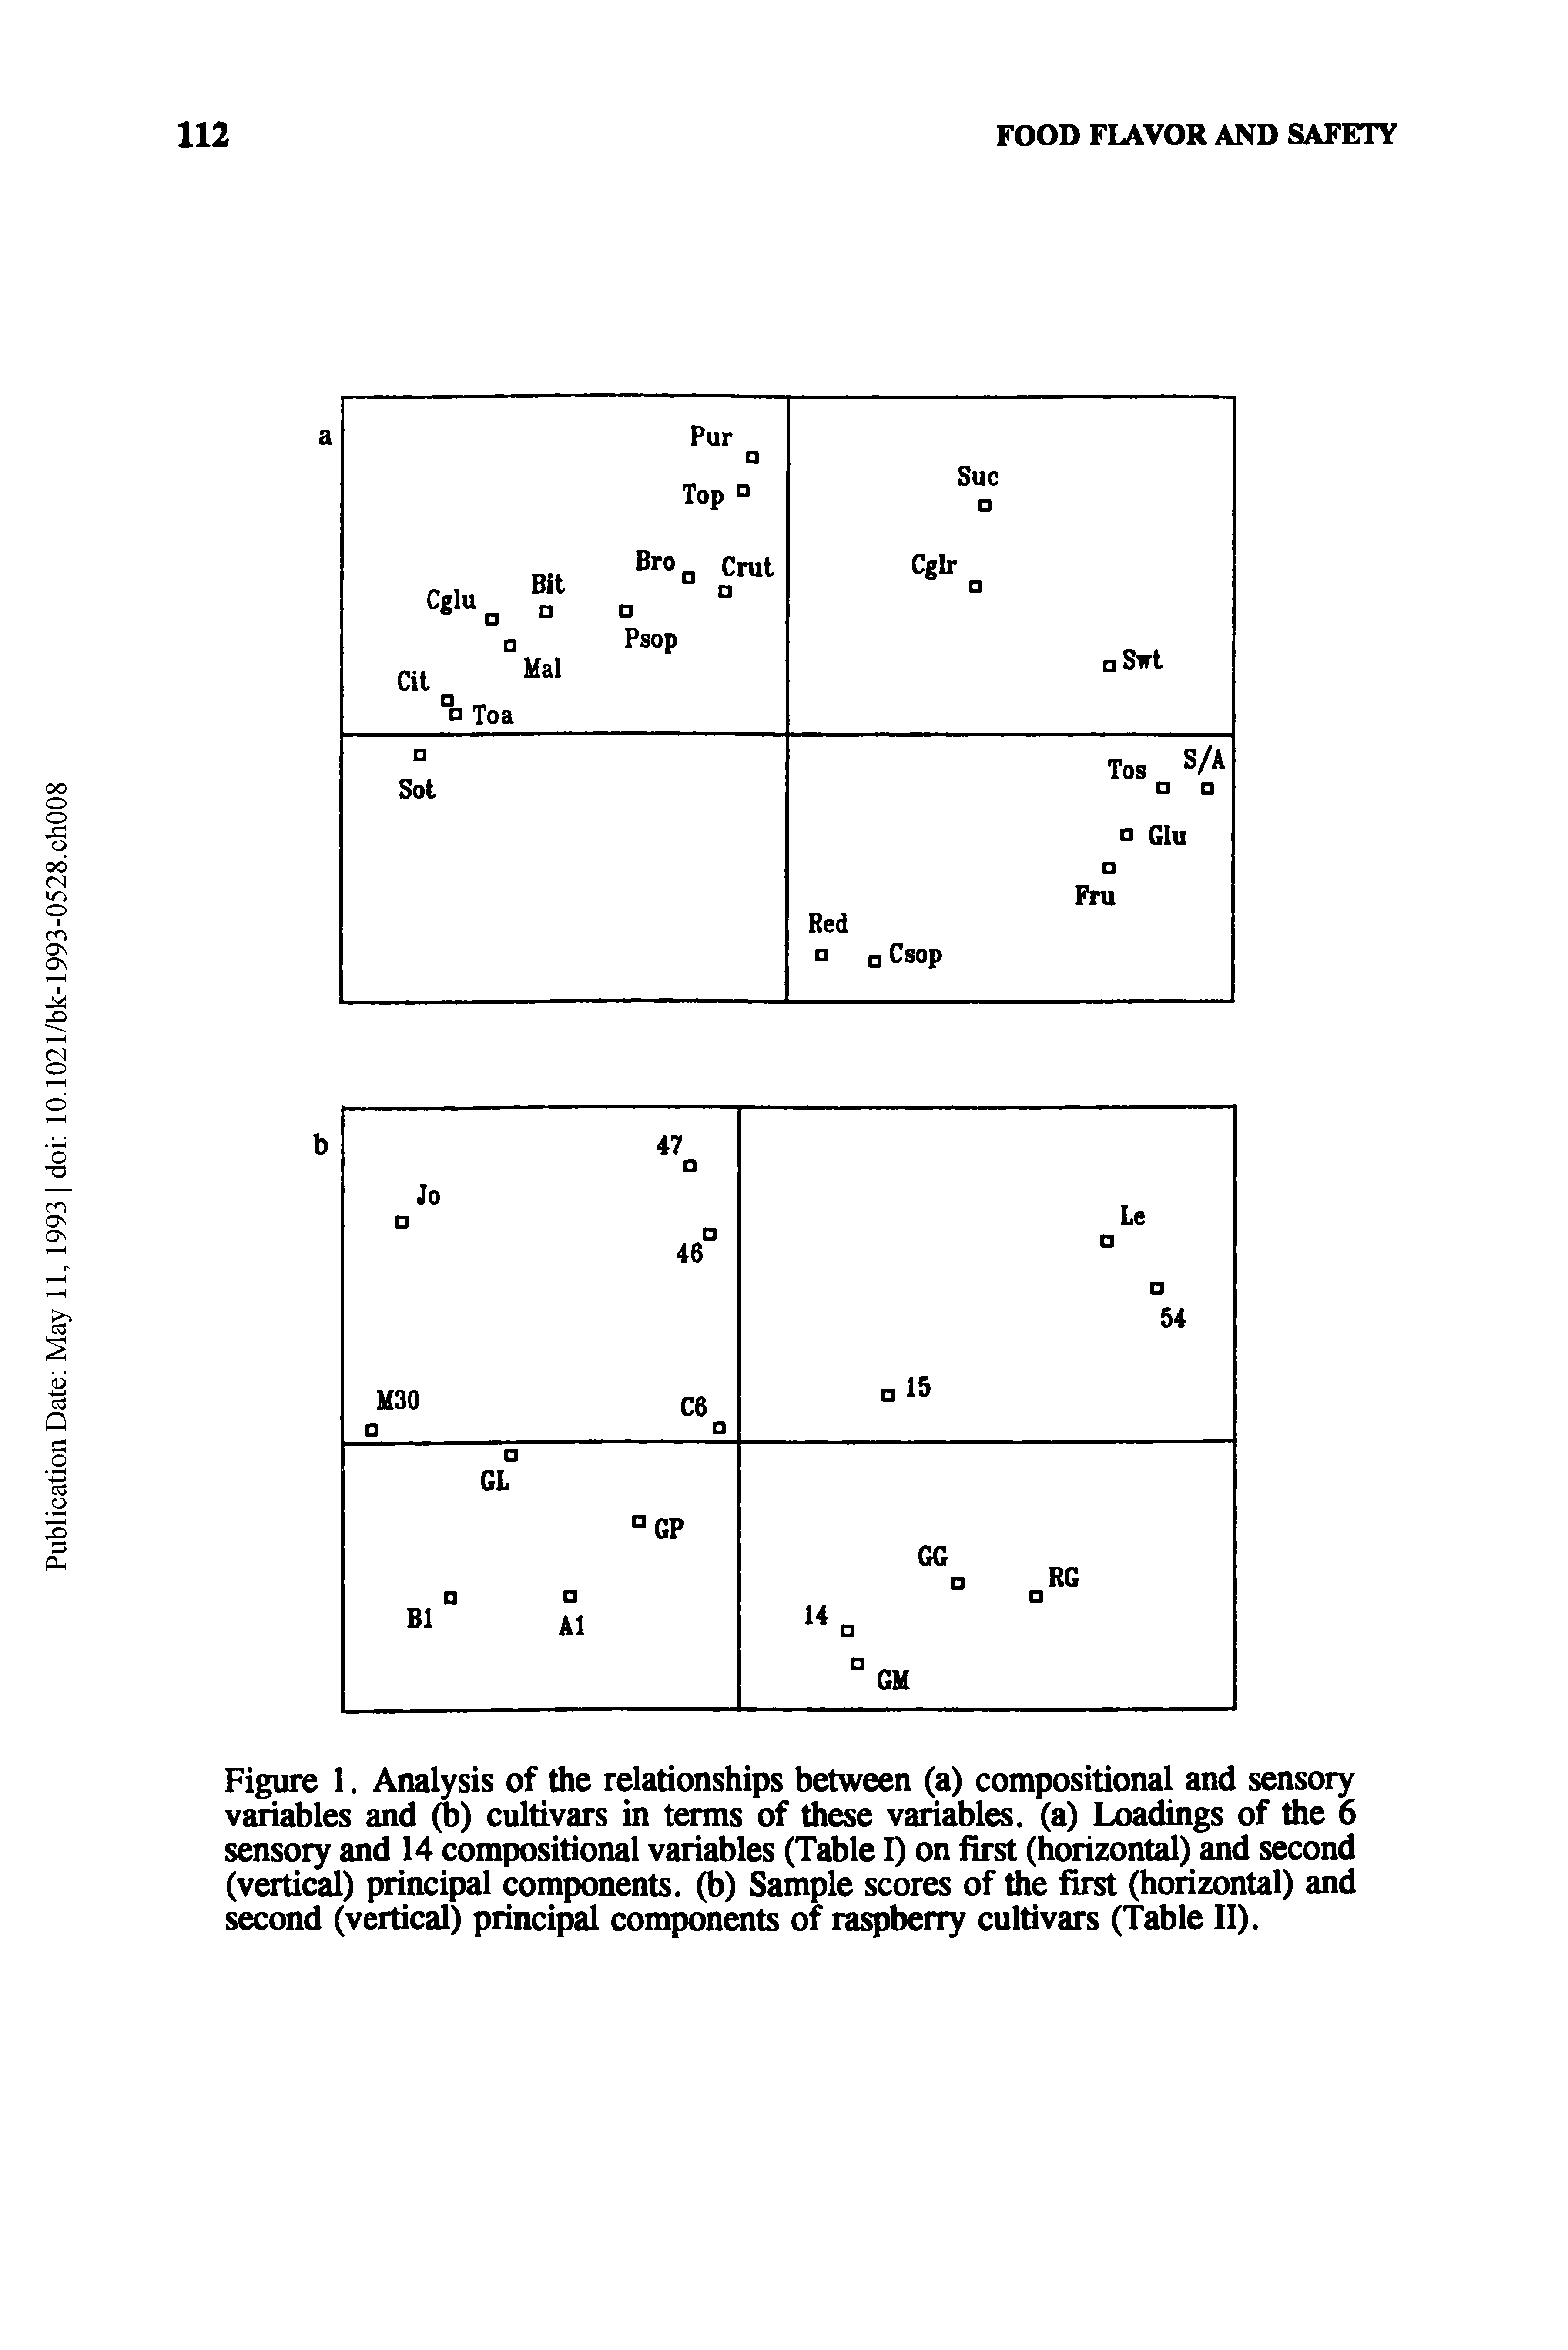 Figure 1. Analysis of the relationships between (a) compositional and sensory variables and (b) cultivars in terms of these variables, (a) Loadings of the 6 sensory and 14 compositional variables (Table I) on first (horizontal) and second (vertical) principal components, (b) Sample scores of the first (horizontal) and second (vertical) principal components of raspberry cultivars (Table II).